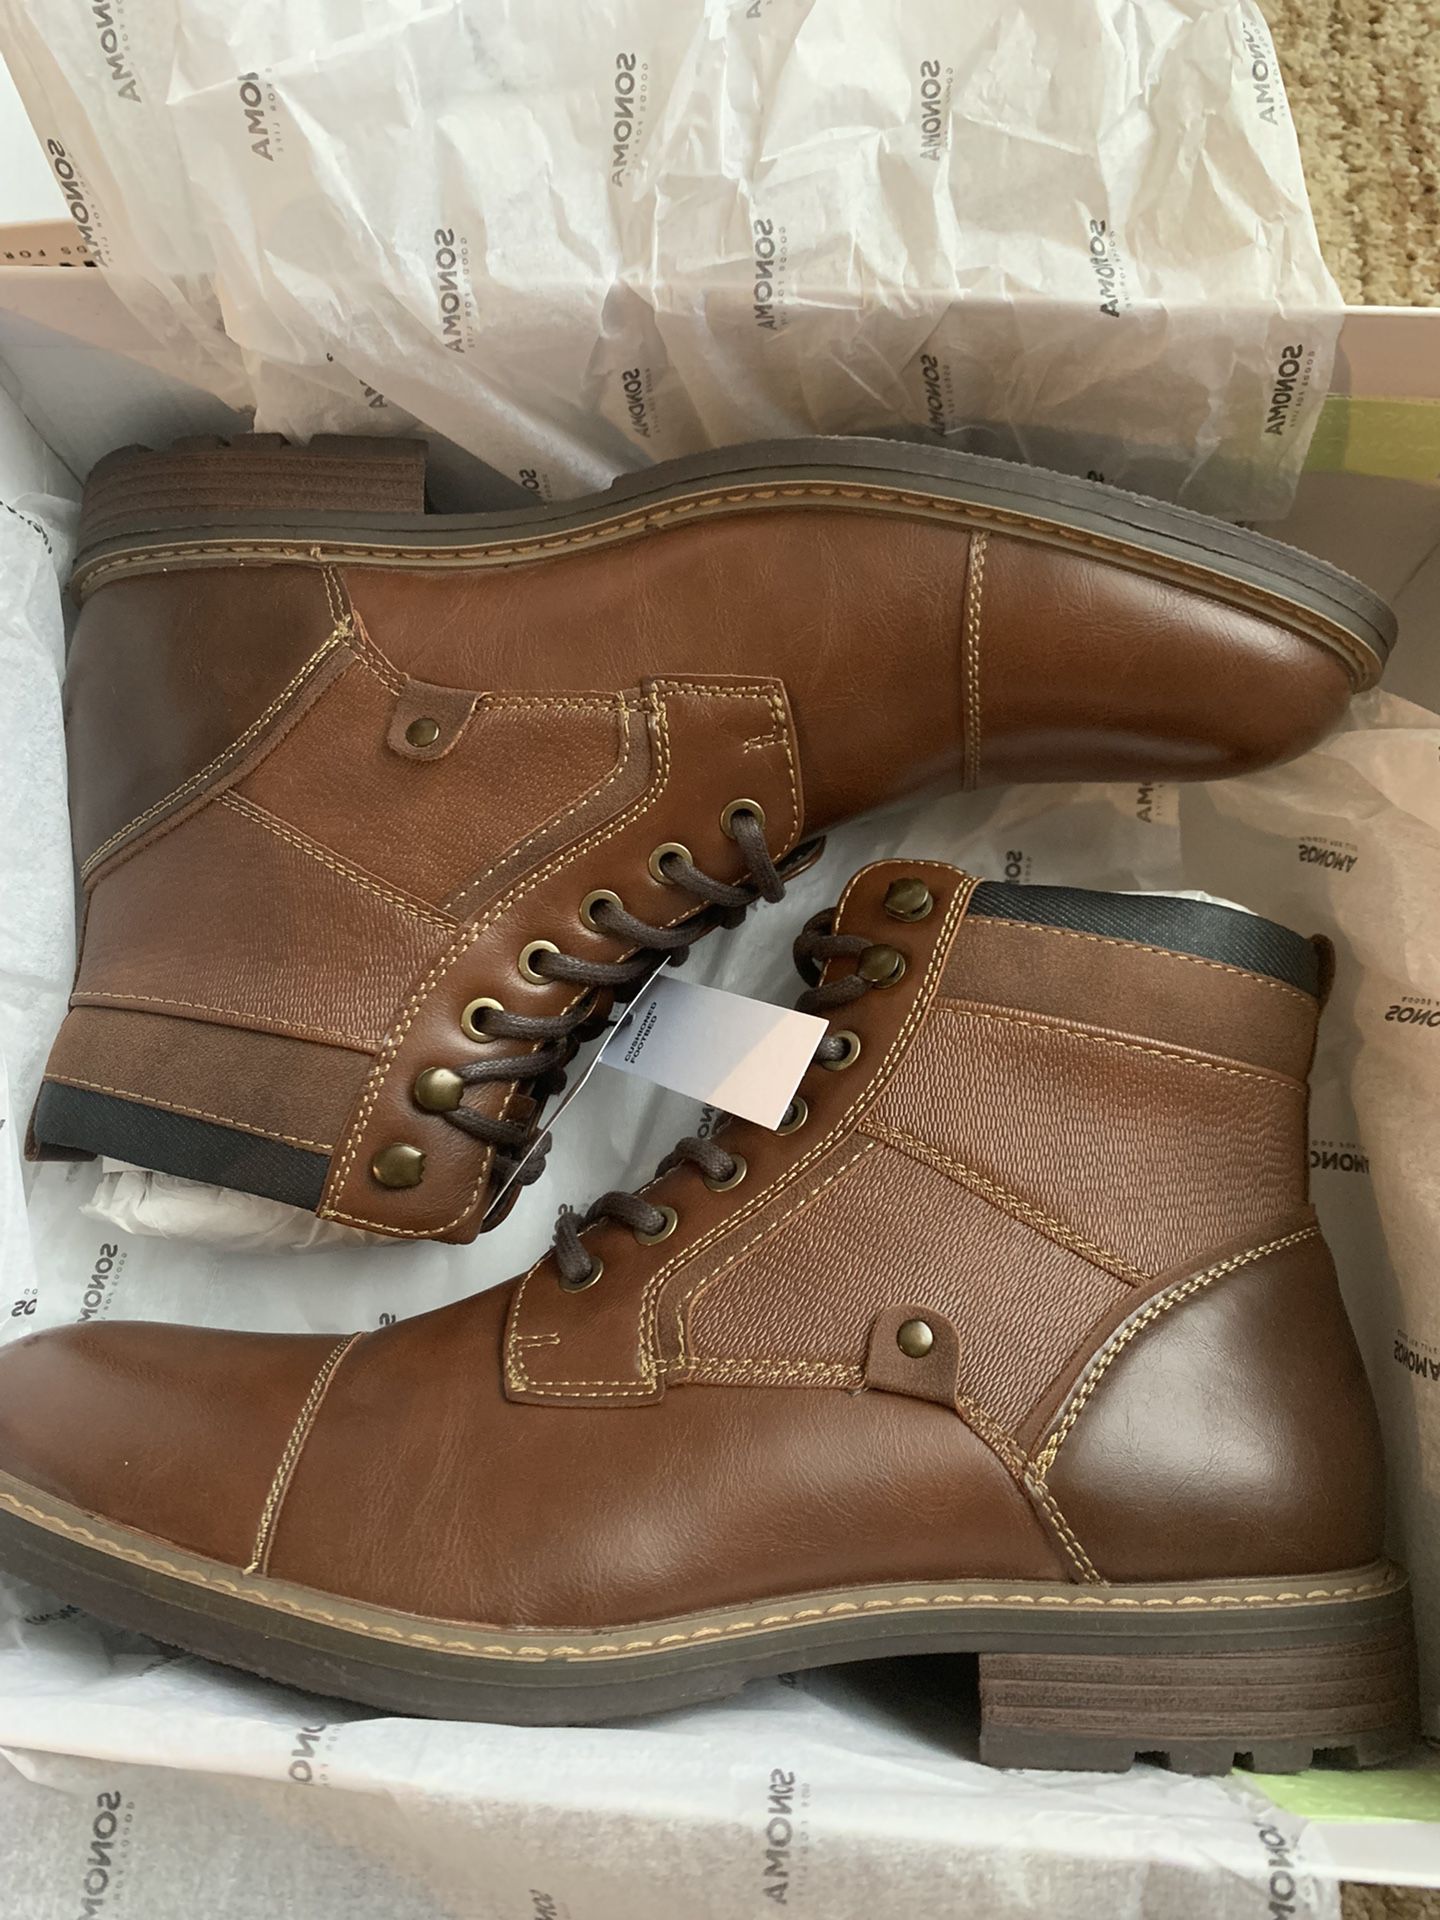 New Men Leather Boots Size 10.5 $20